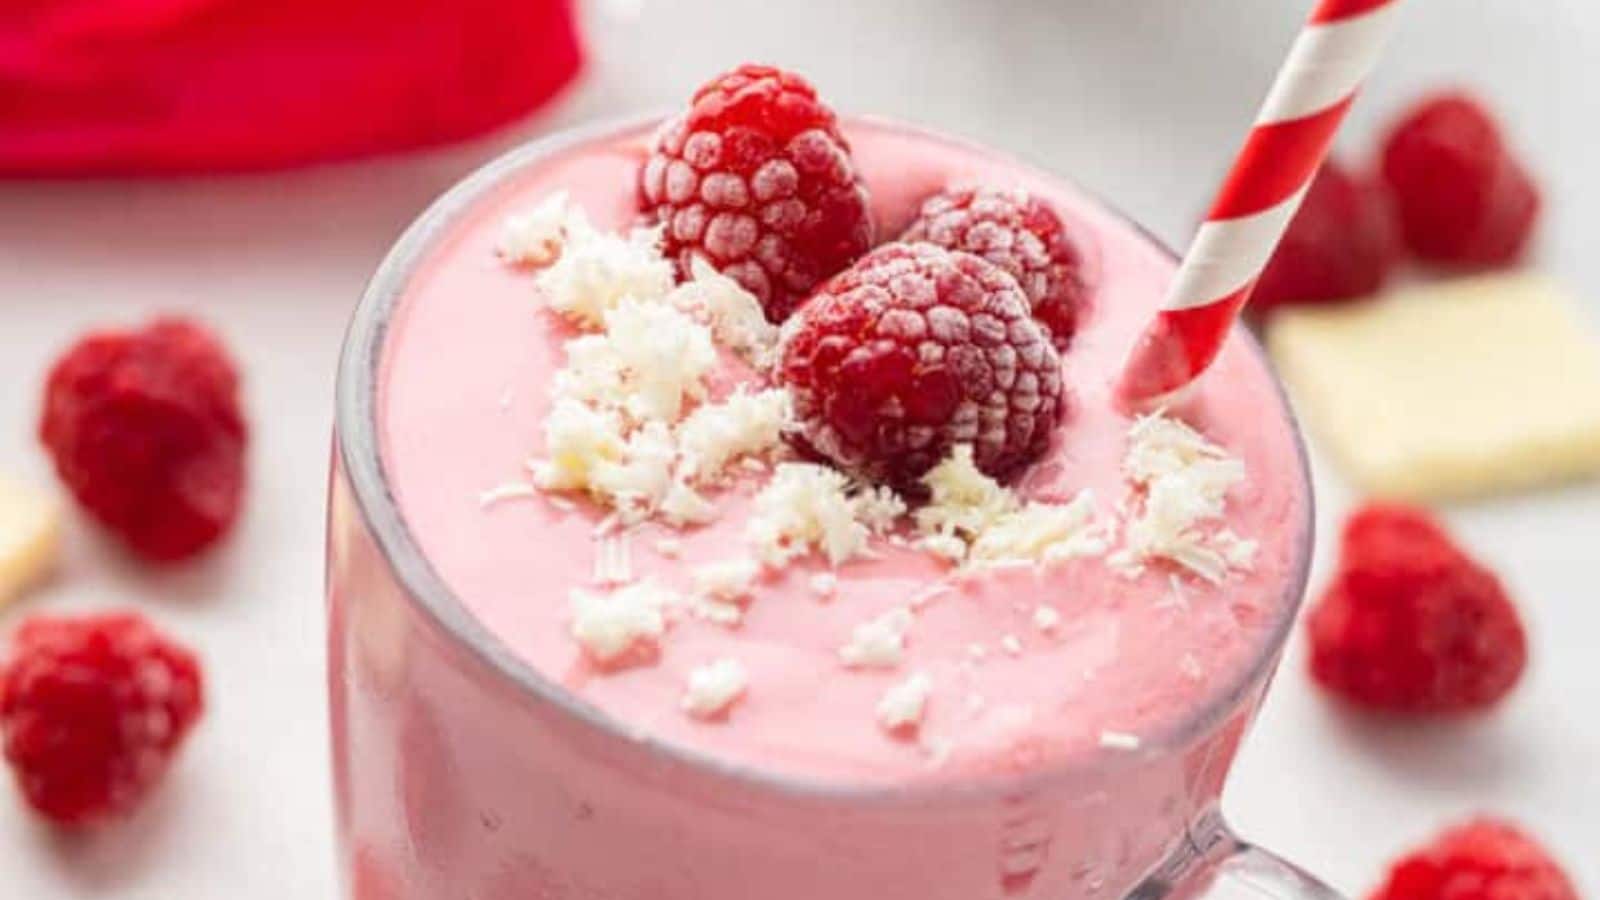 A pink smoothie with raspberries and white chocolate.